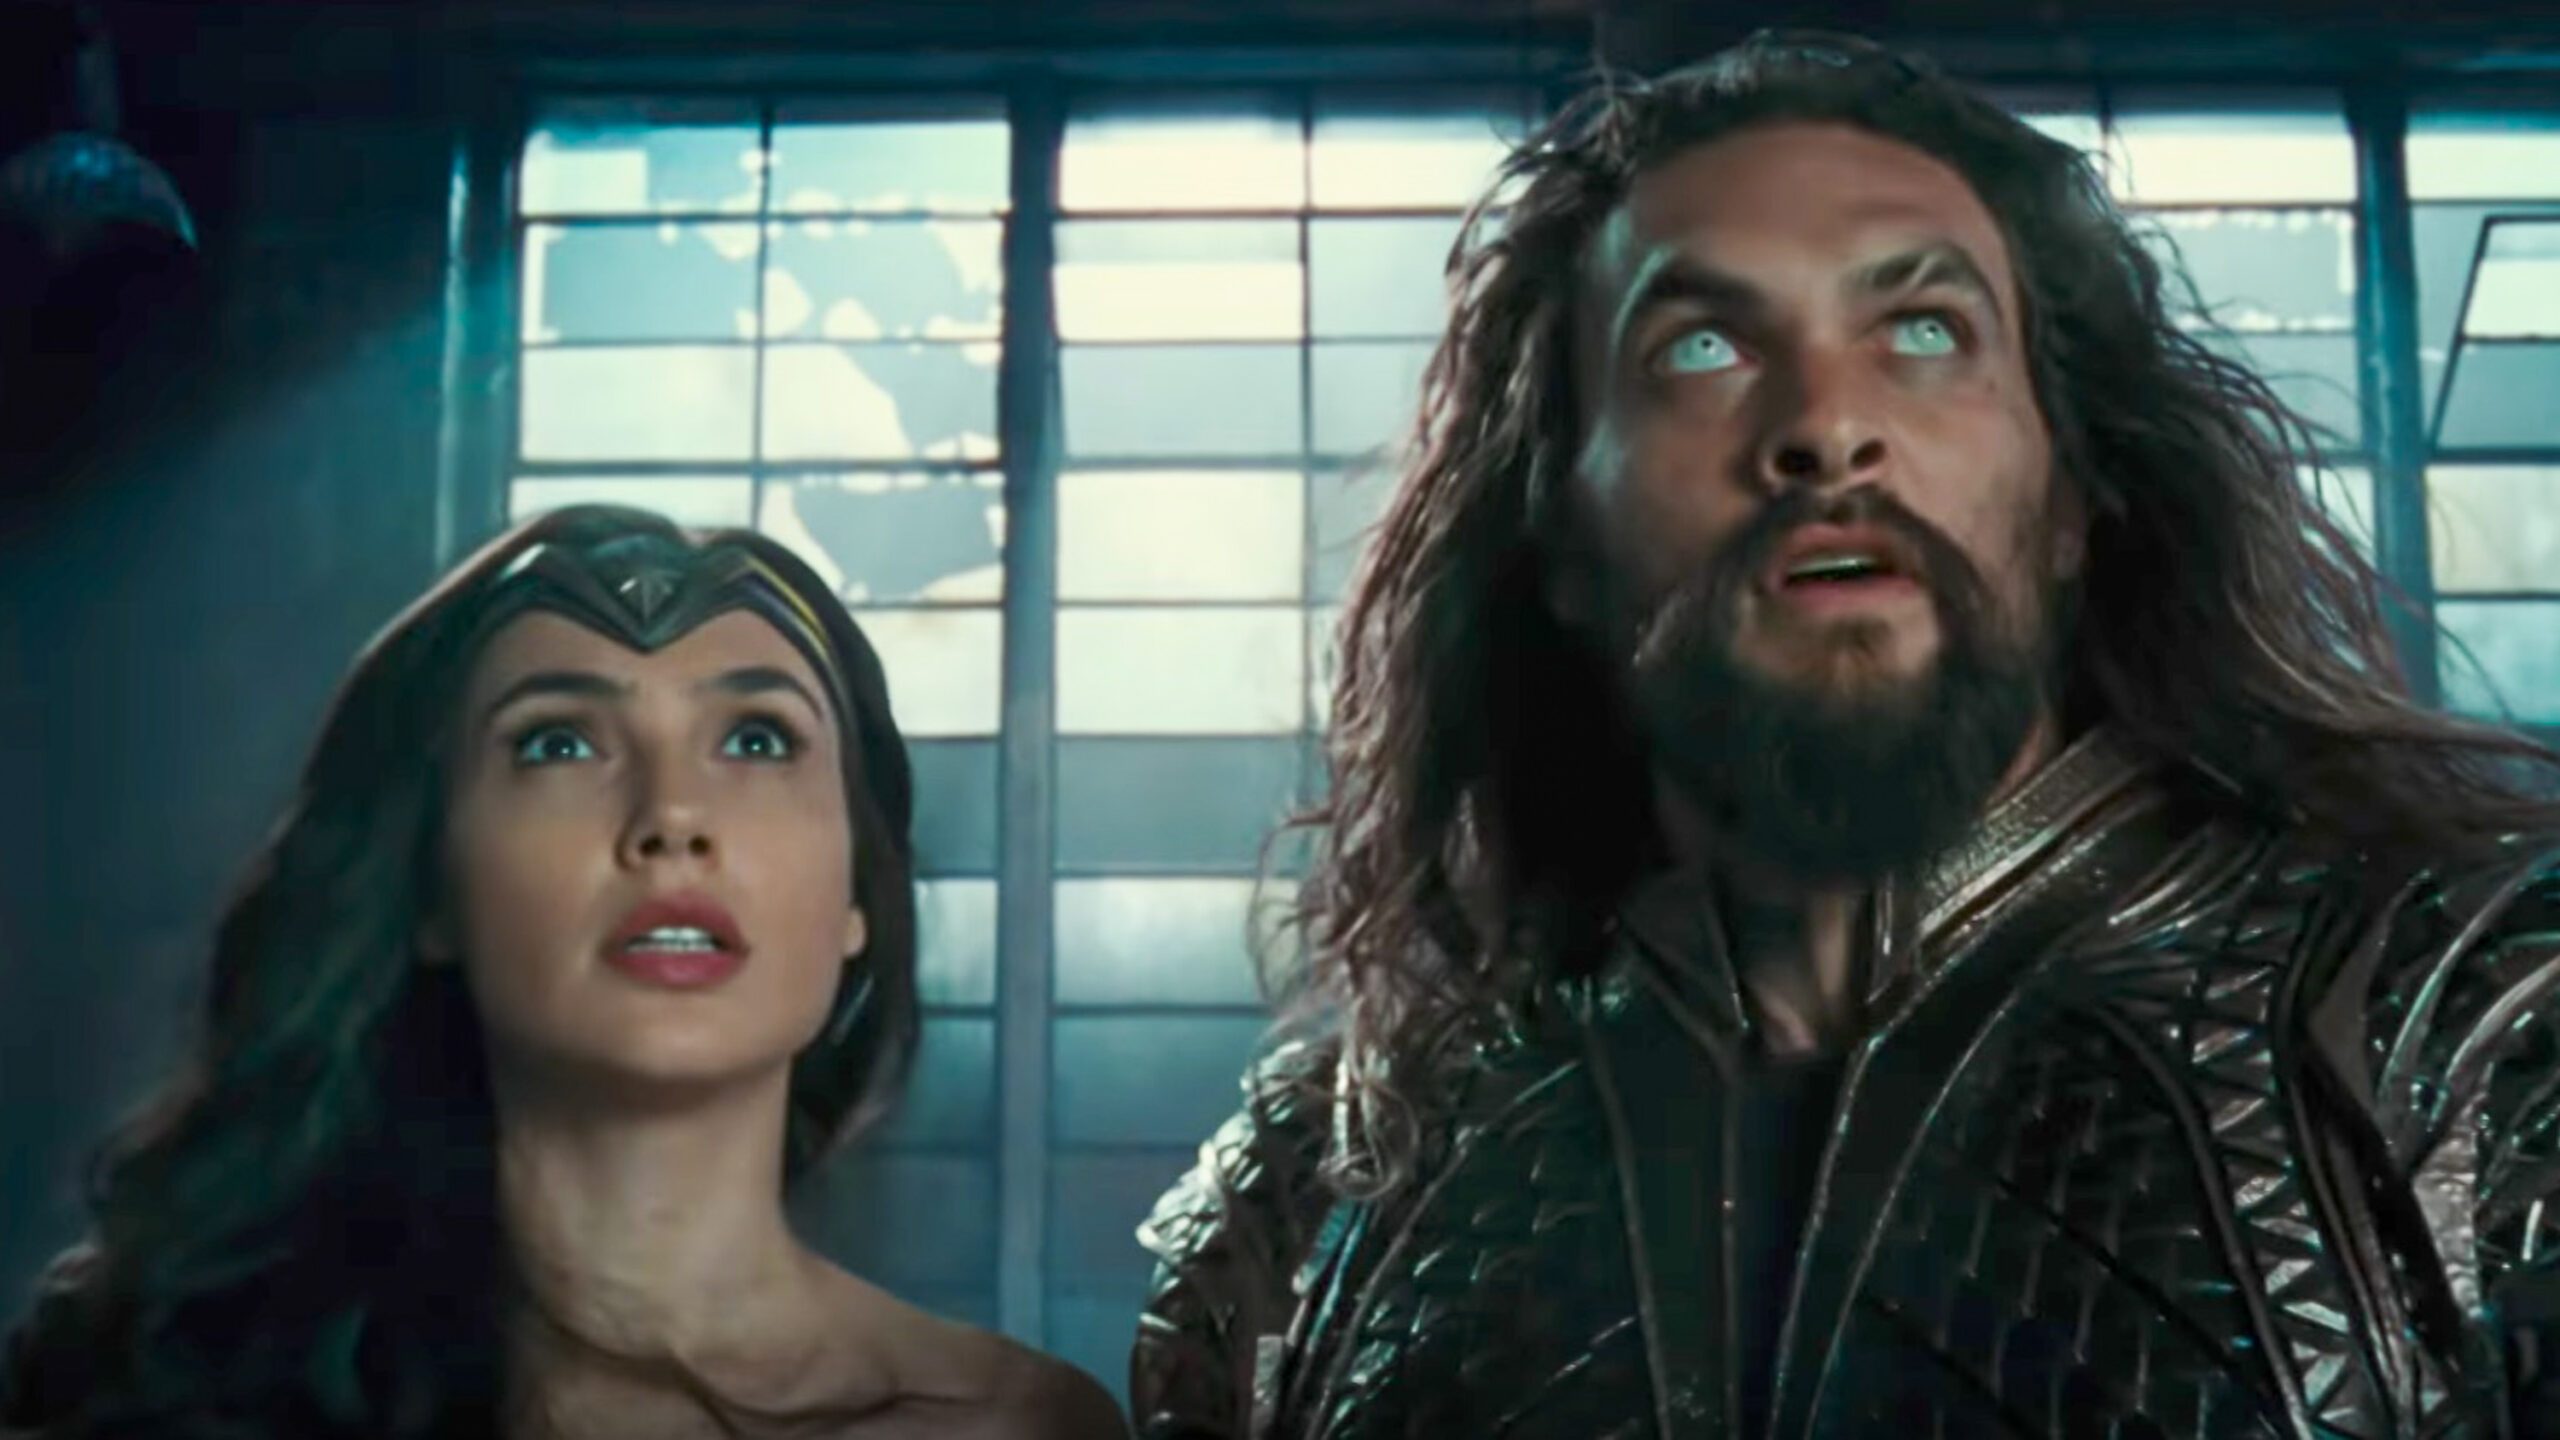 WATCH: New ‘Justice League’ trailer debuts at SDCC 2017